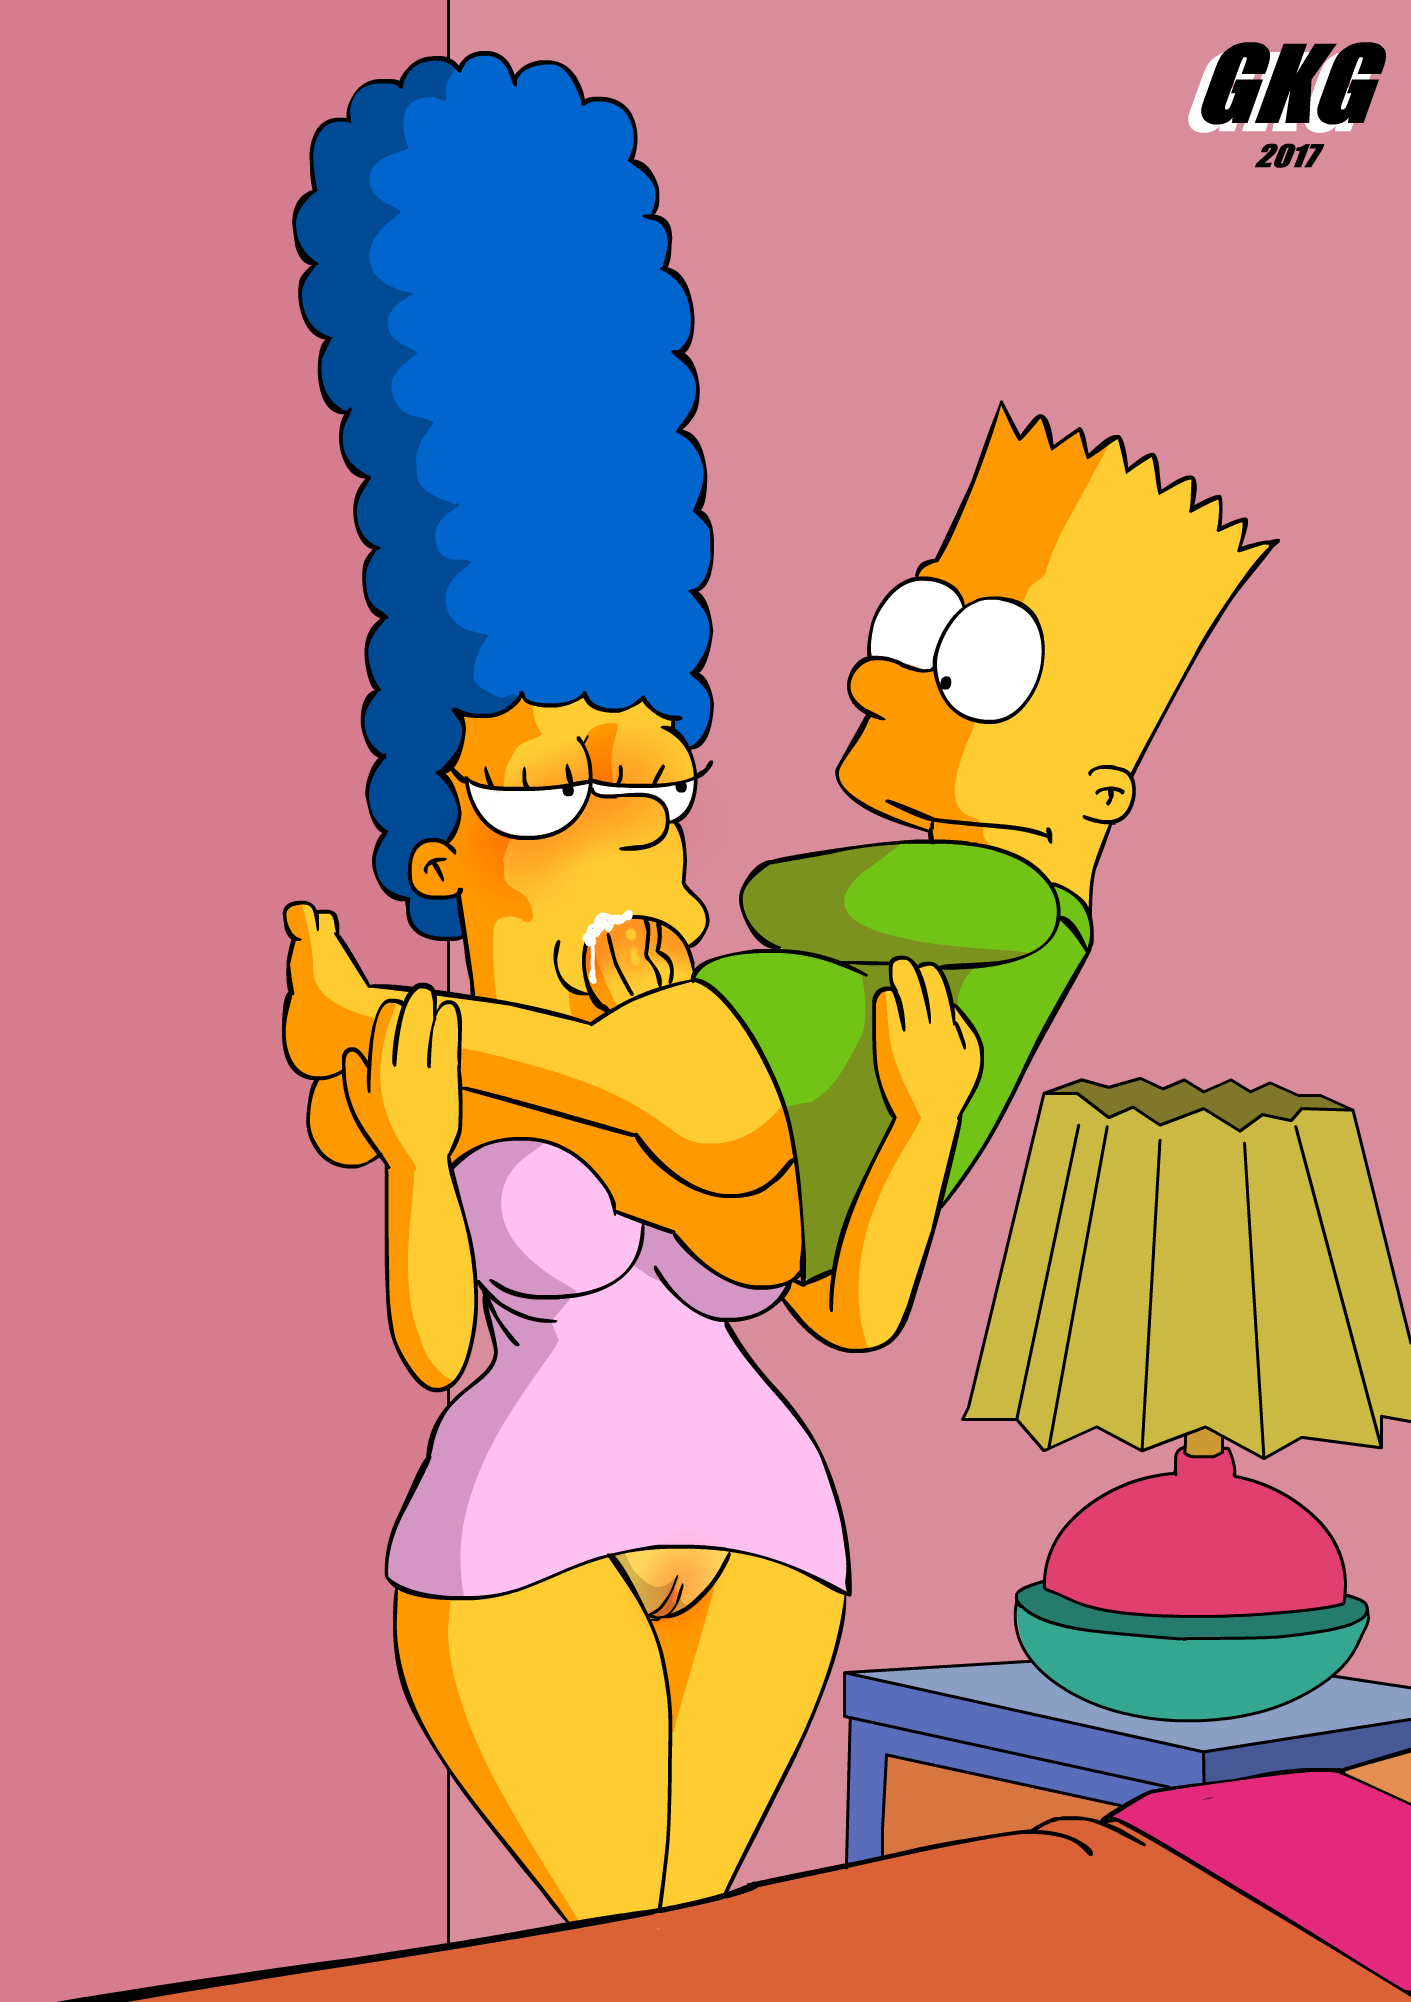 Stockings marge in simpsons nackt Marge Simpson